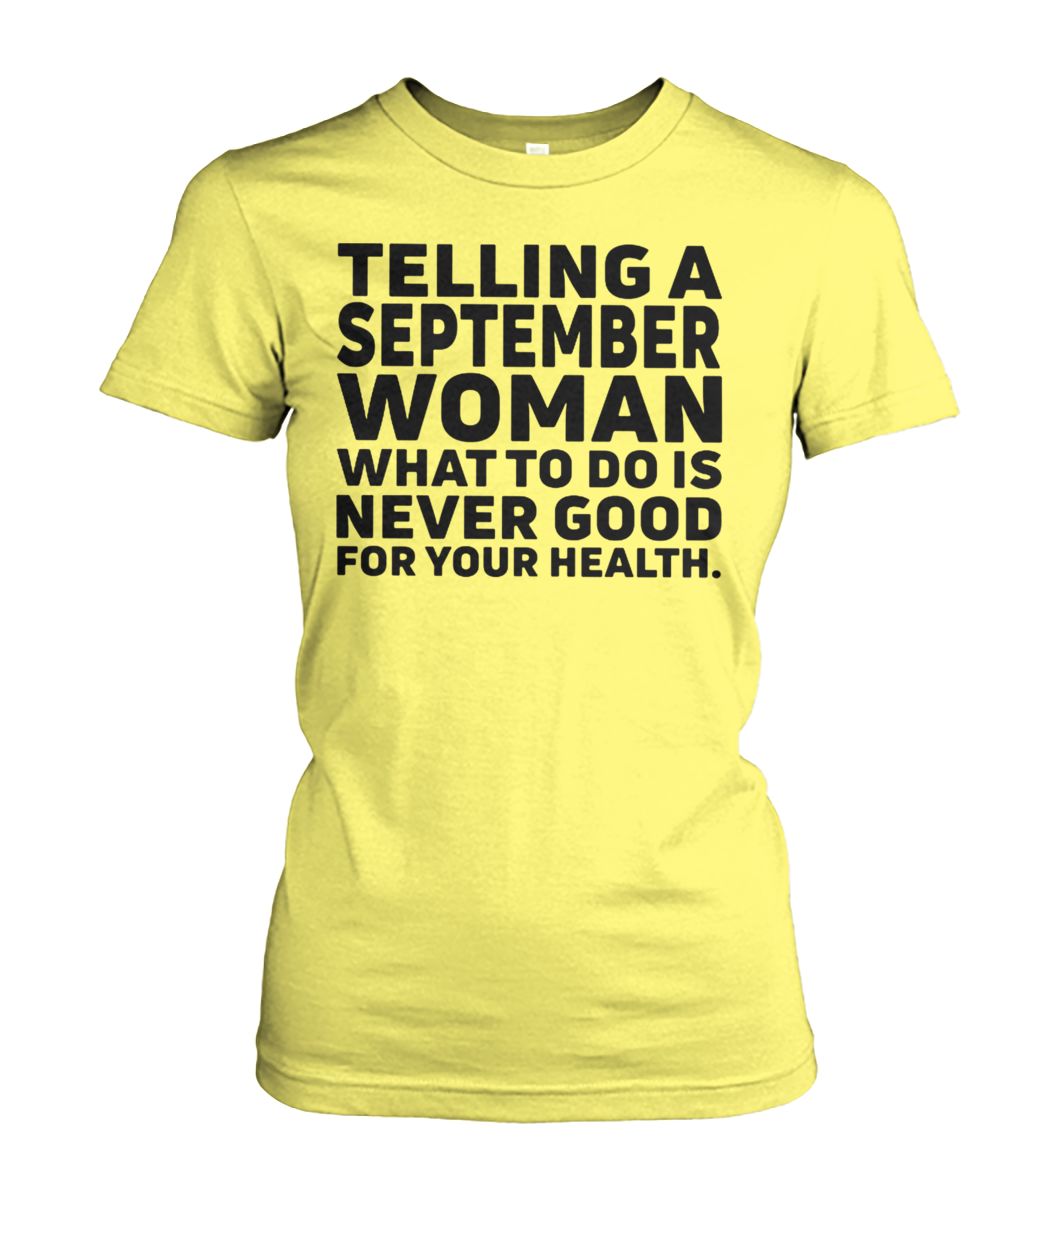 Telling a september woman what to do is never good for your health women's crew tee